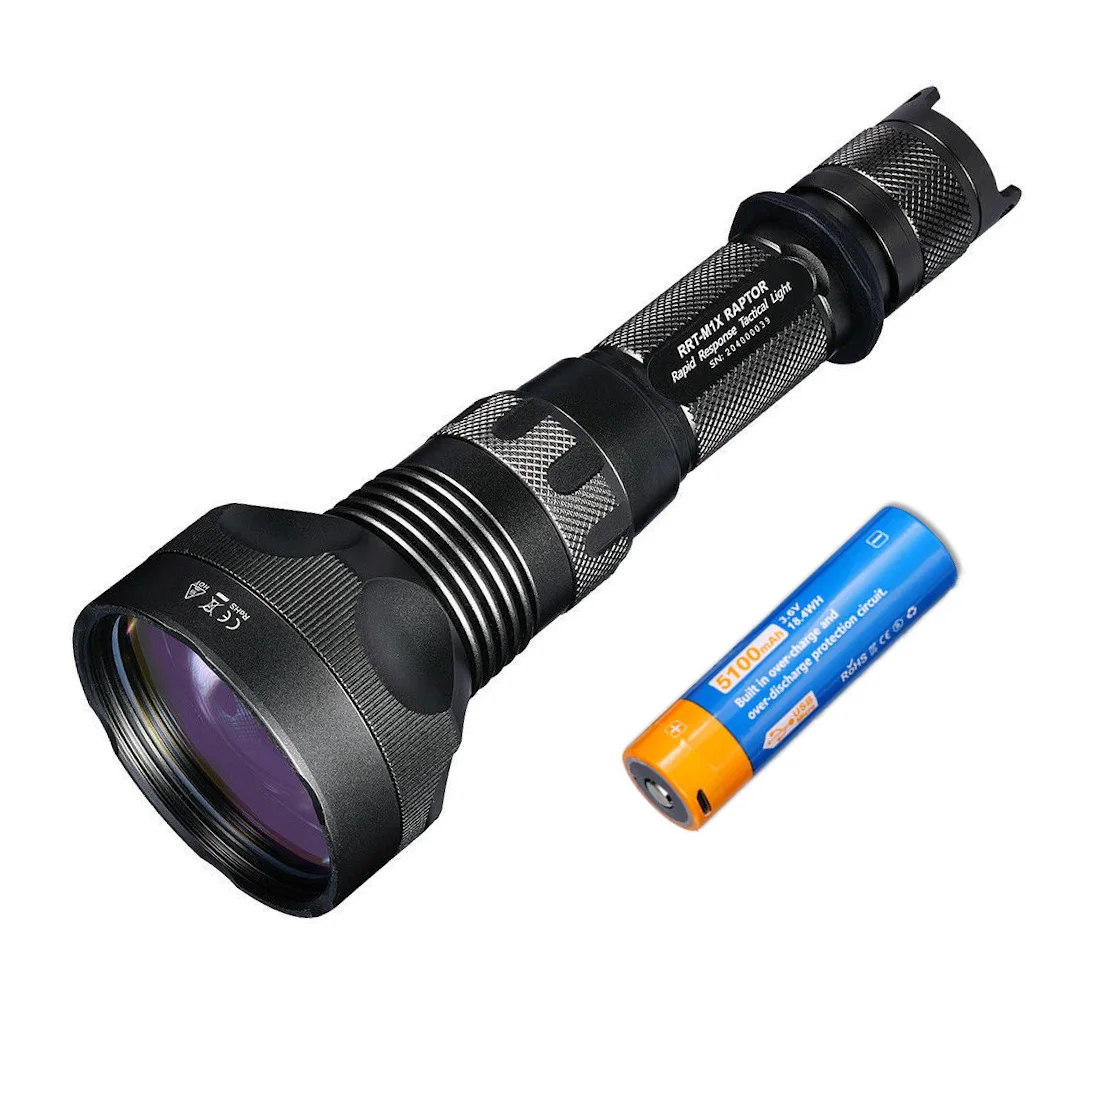 

JETBeam RRT-M1X 480LM 2.3KM Rotary Switch LEP Spotlight IPX8 Waterproof Tactical Search Flashlight with USB Charge 21700 Battery